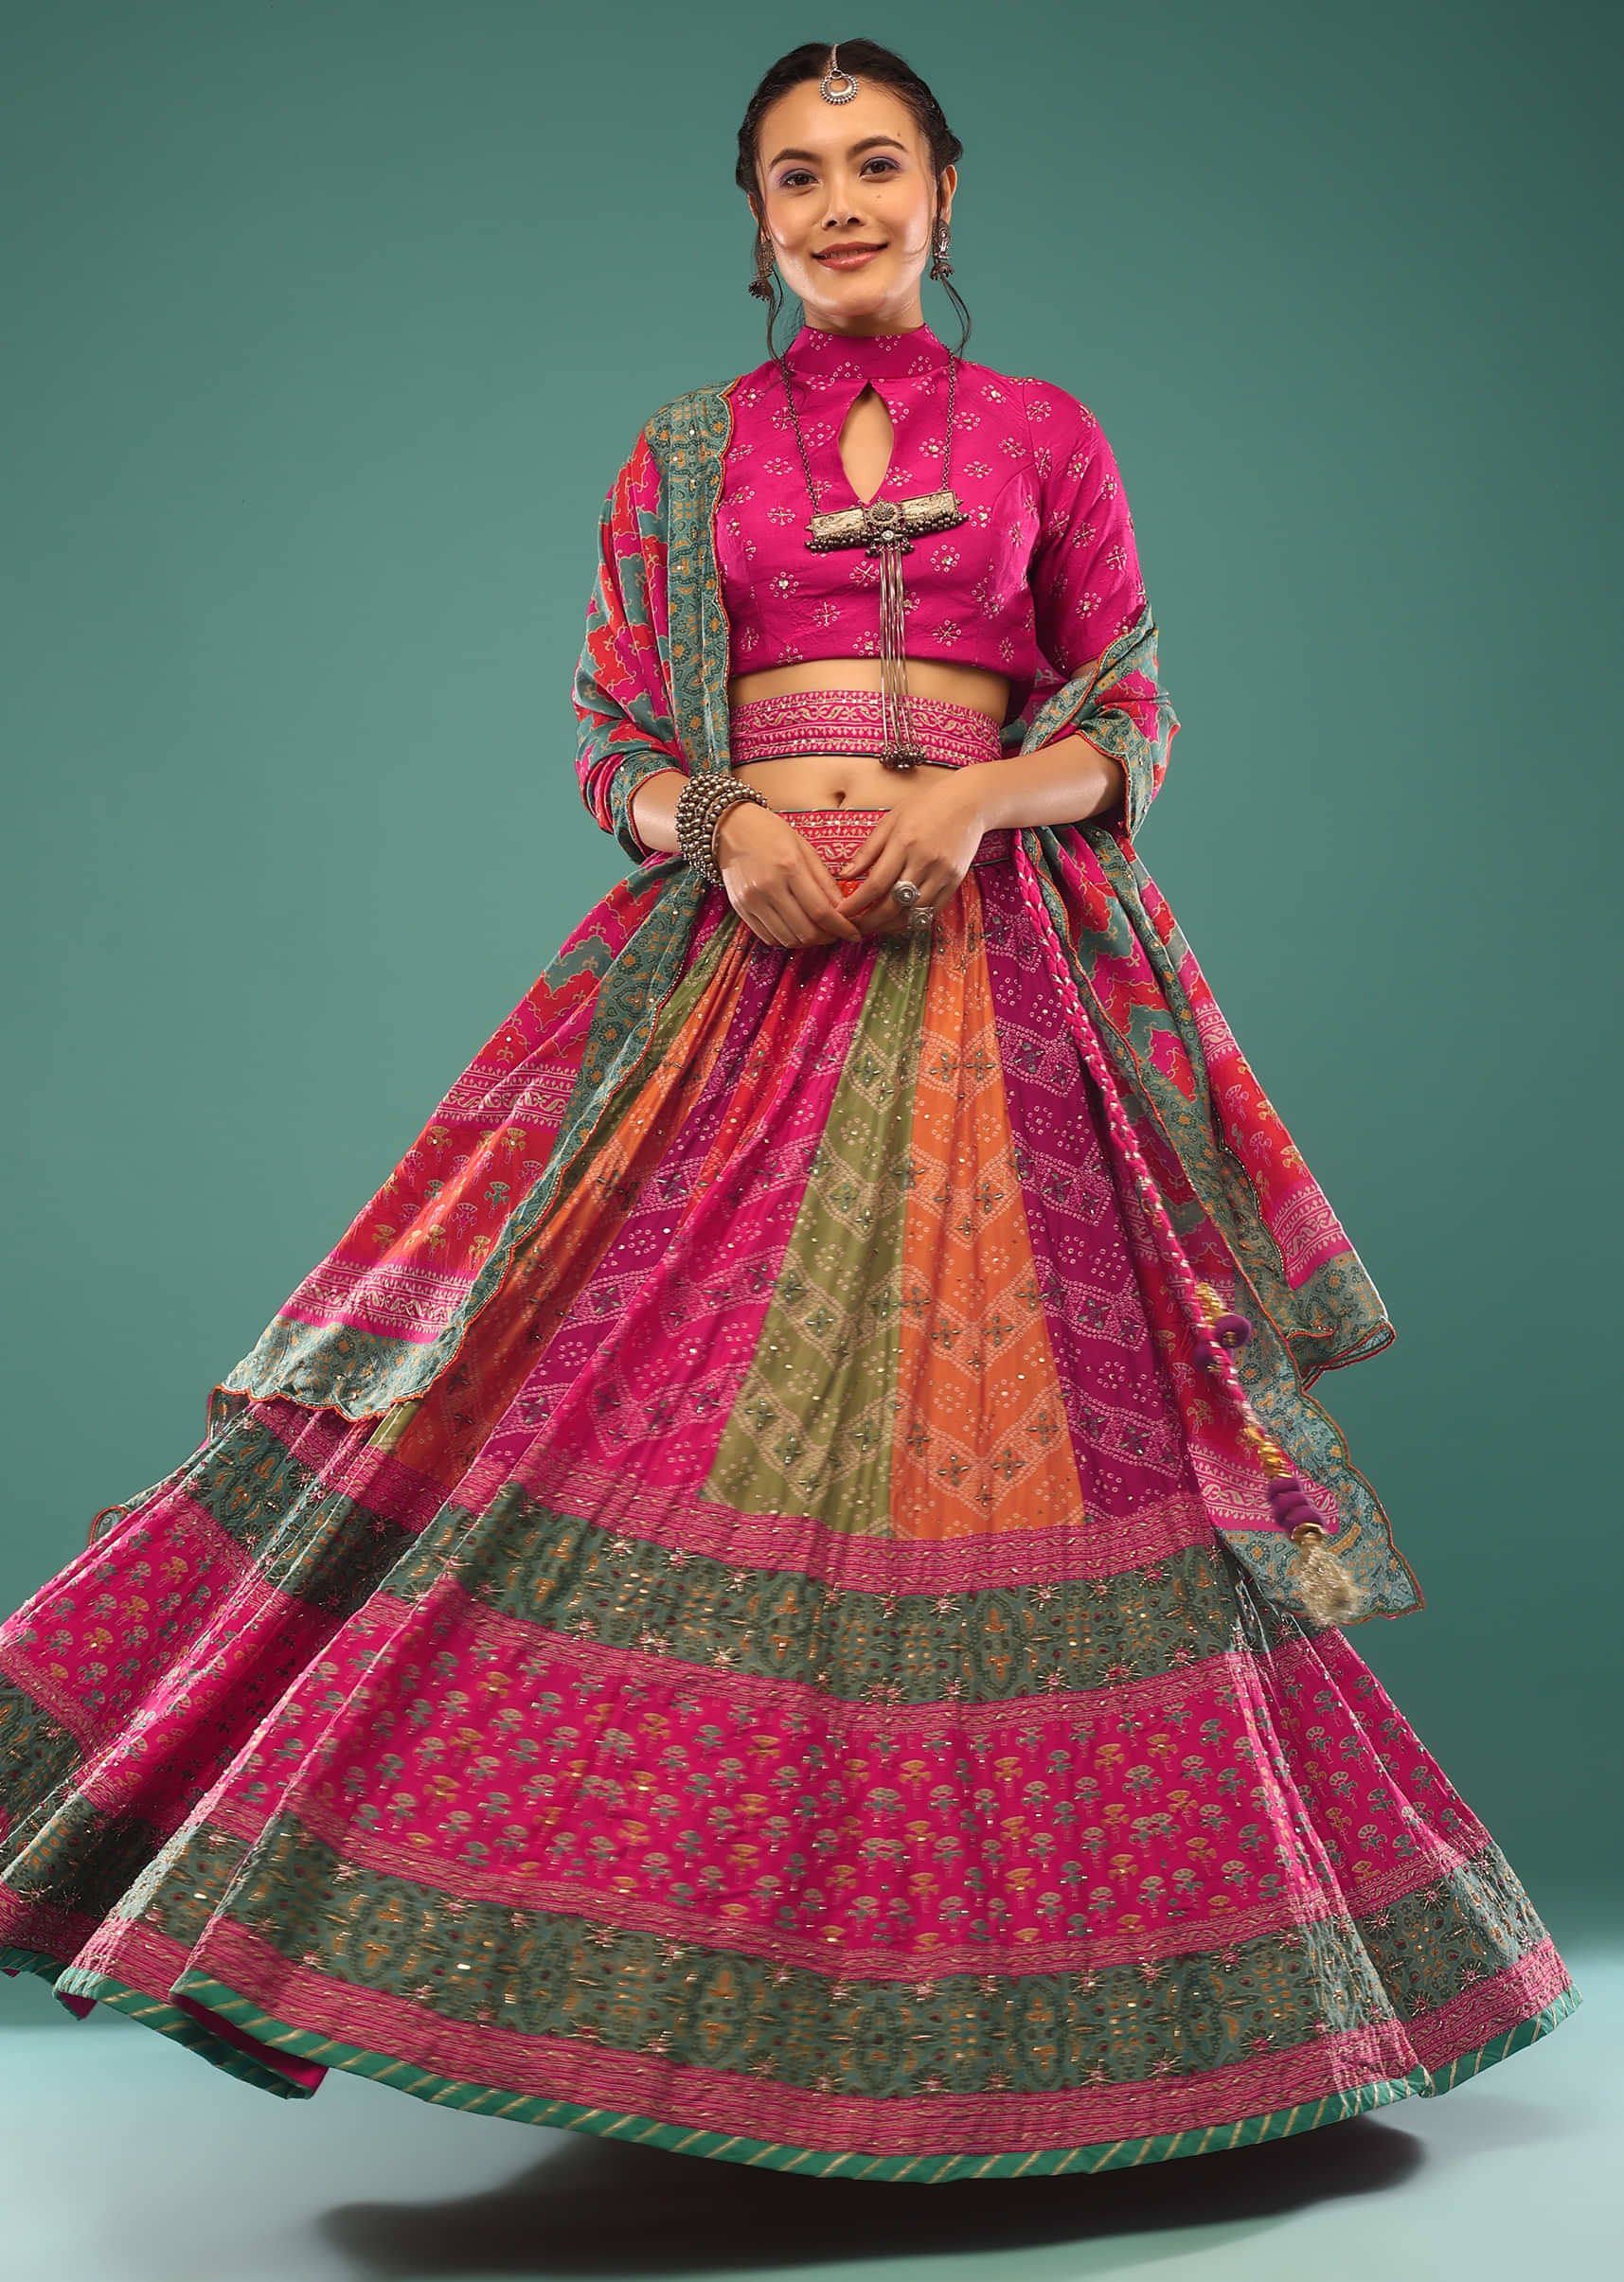 Buy Multi-Colored Lehenga In Bandhani And Jaipuri Folk Print, Paired With  The Dupatta And Choli In Sequins And Cut Dana Embroidery.